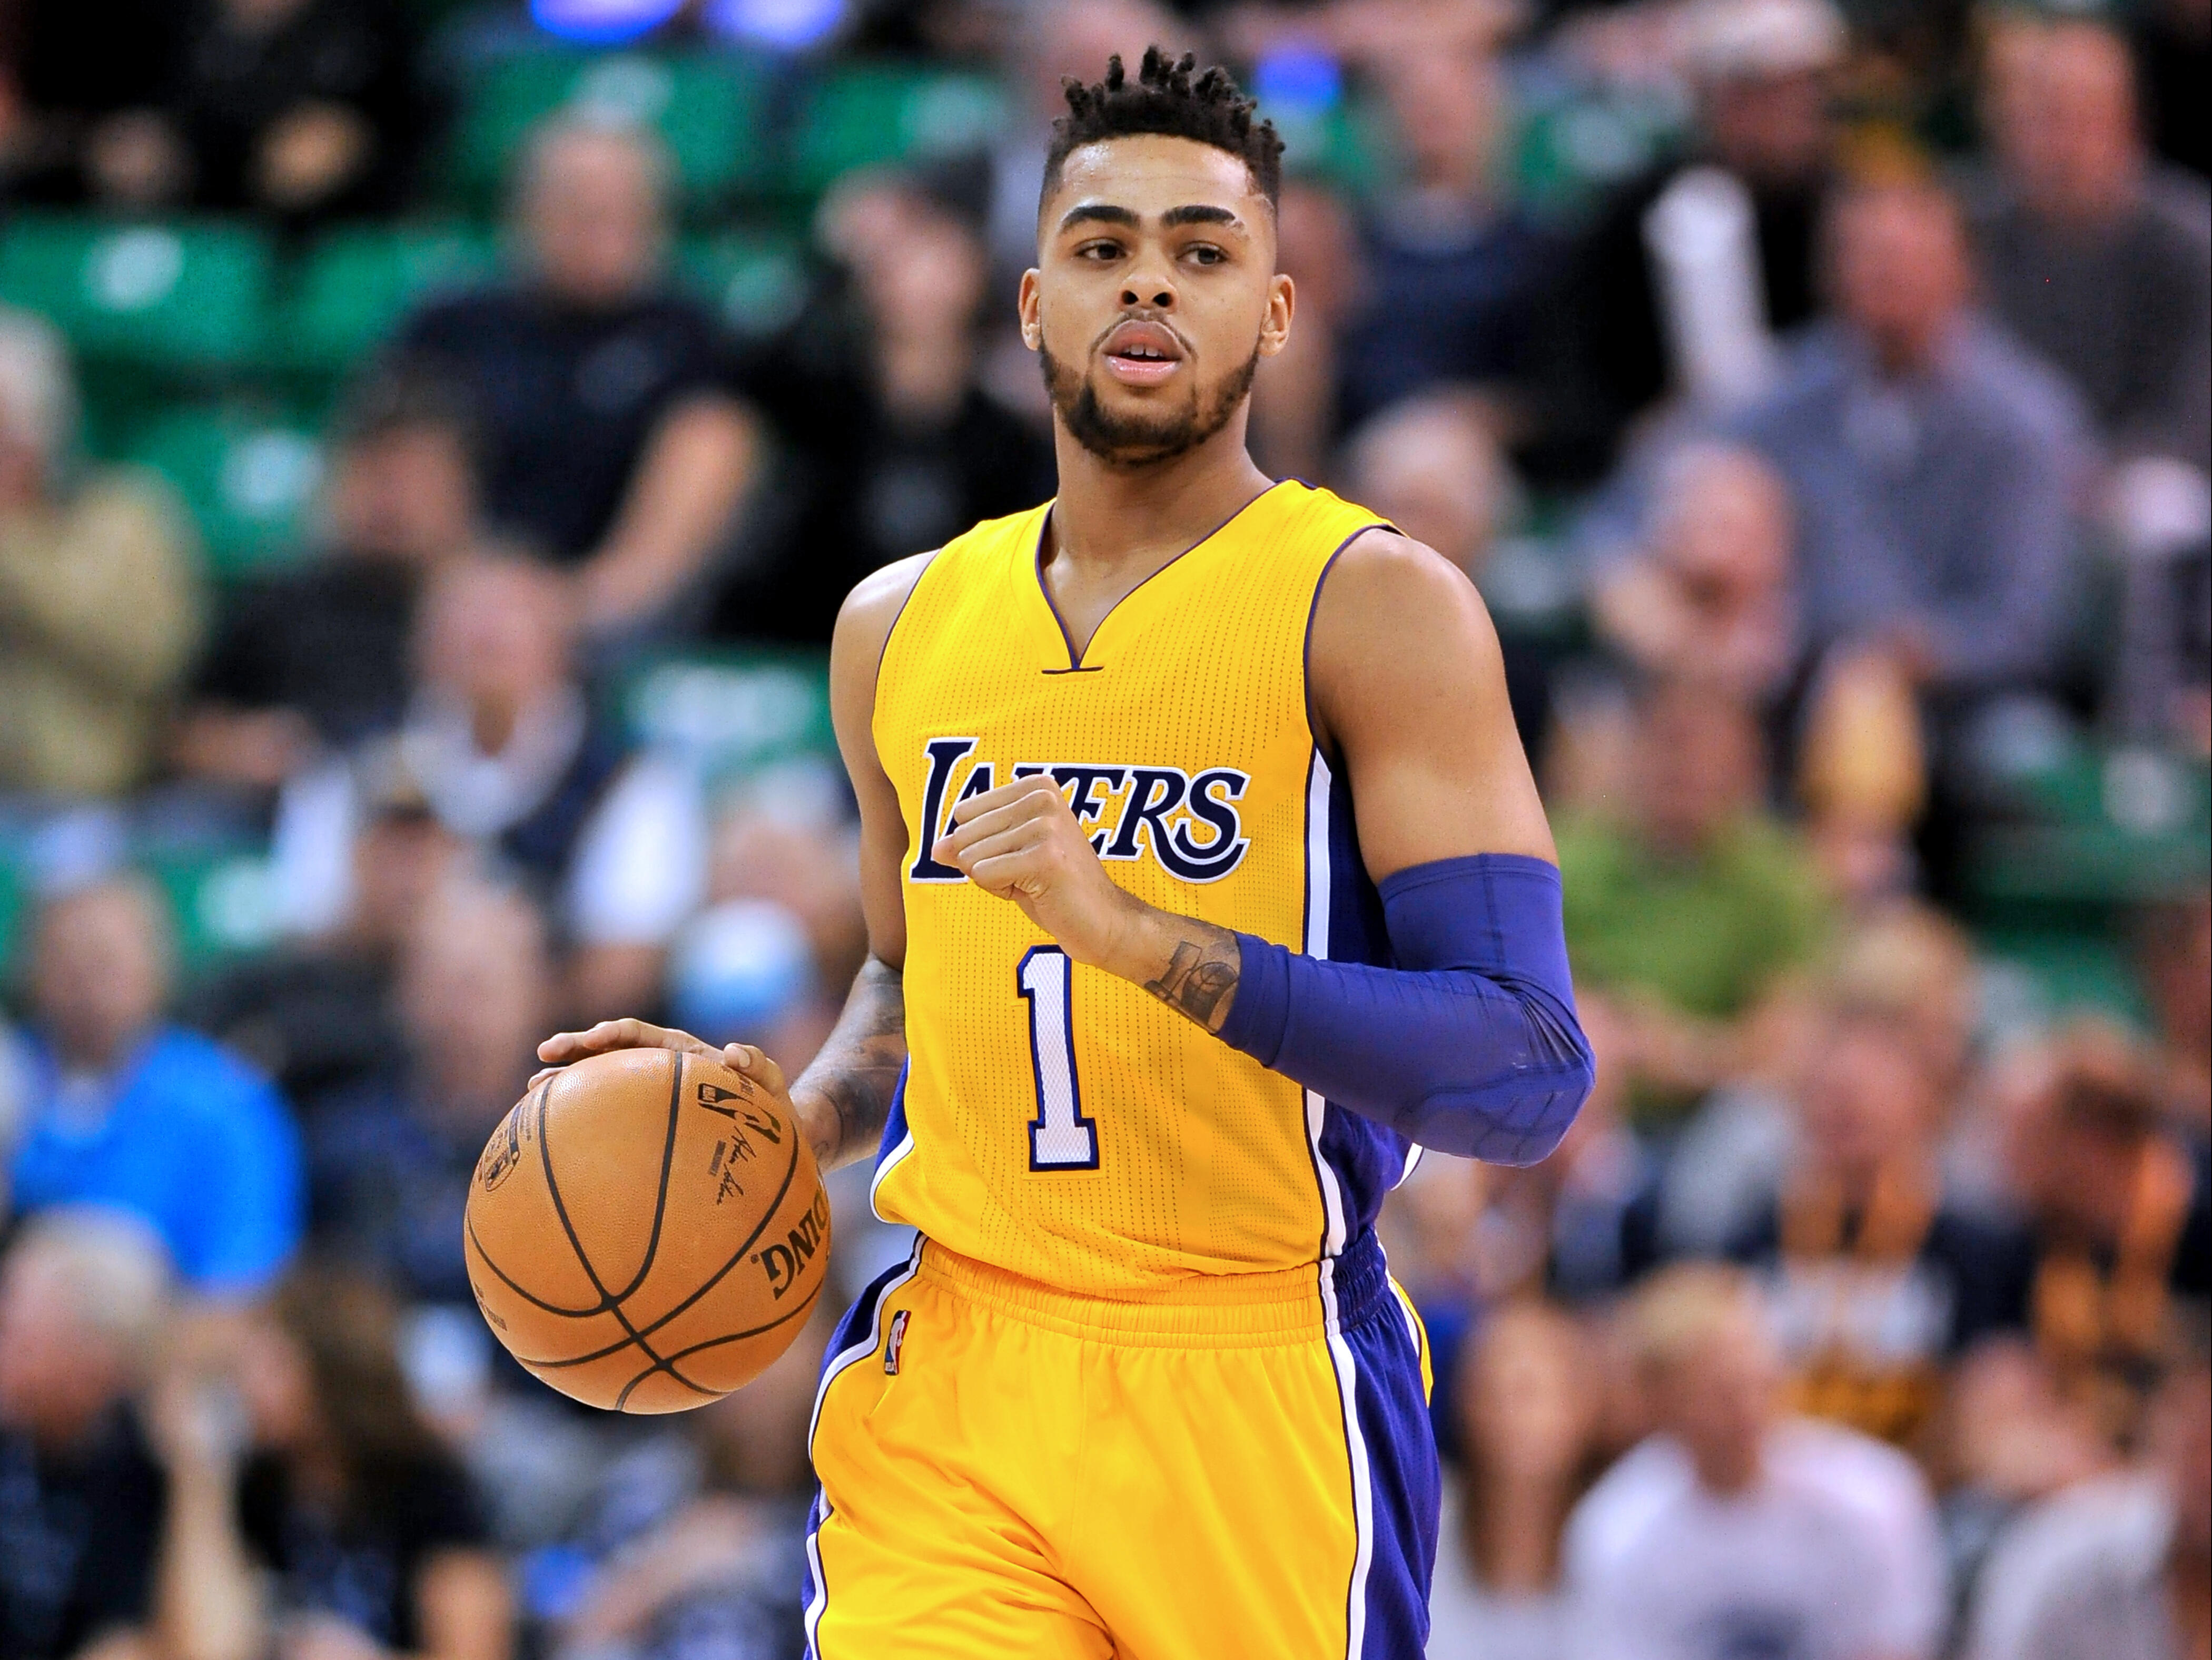 SALT LAKE CITY, UT - OCTOBER 28: D'Angelo Russell #1 of the Los Angeles Lakers controls the ball during their game against the Utah Jazz at Vivint Smart Home Arena on October 28, 2016 in Salt Lake City, Utah. NOTE TO USER: User expressly acknowledges and 